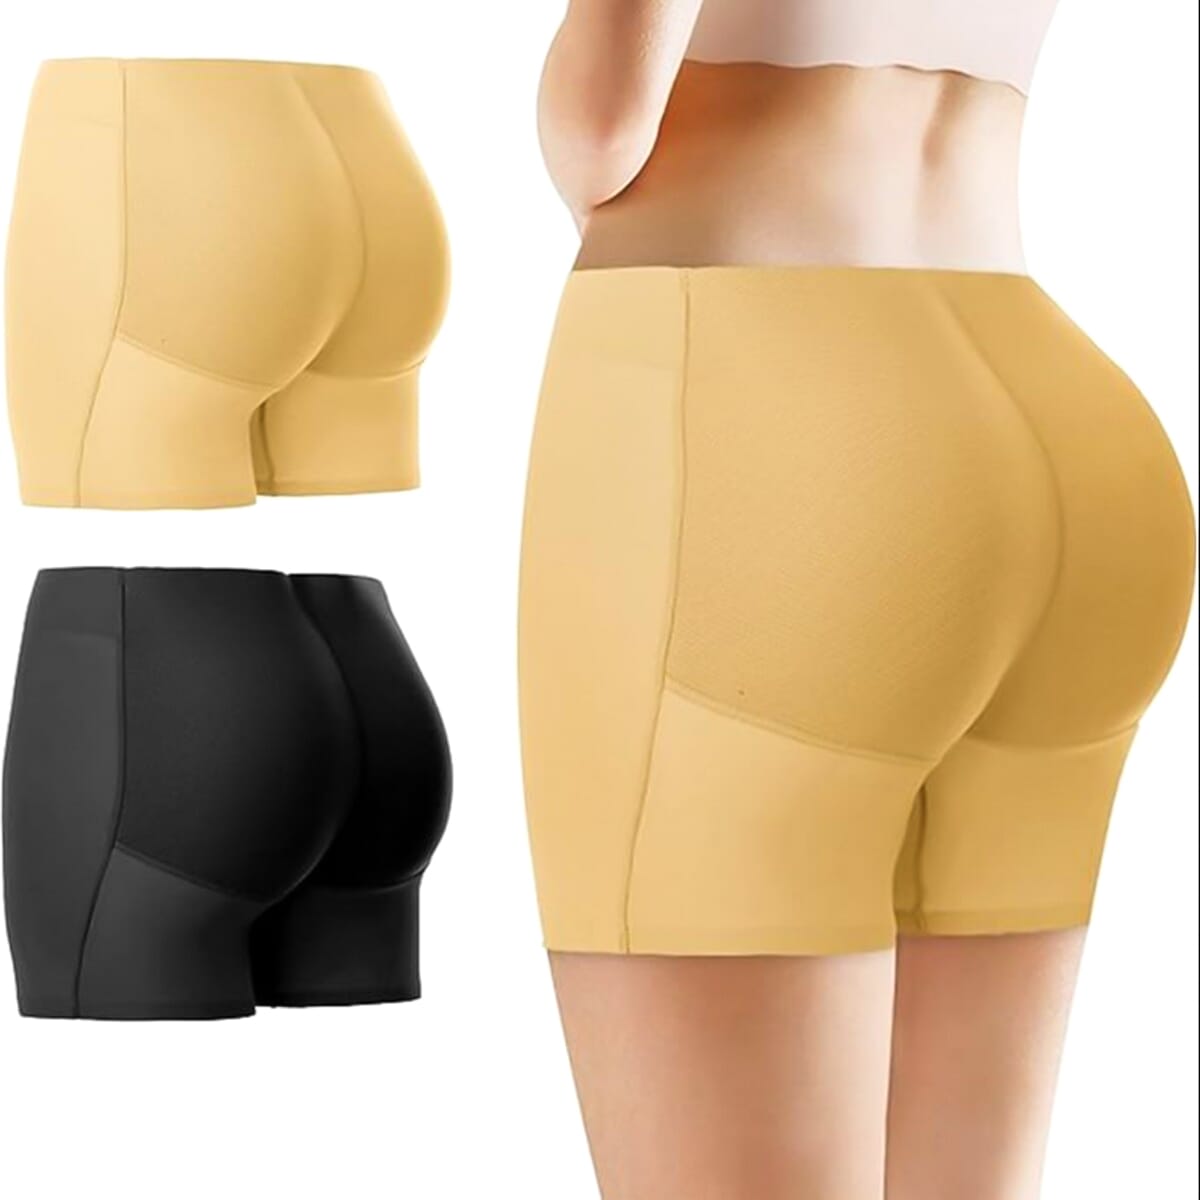 New Body Shapers Ladies Butt Lift Panties Tunny Control Padded Fake Ass  Underwear Female Breathable Shapewear